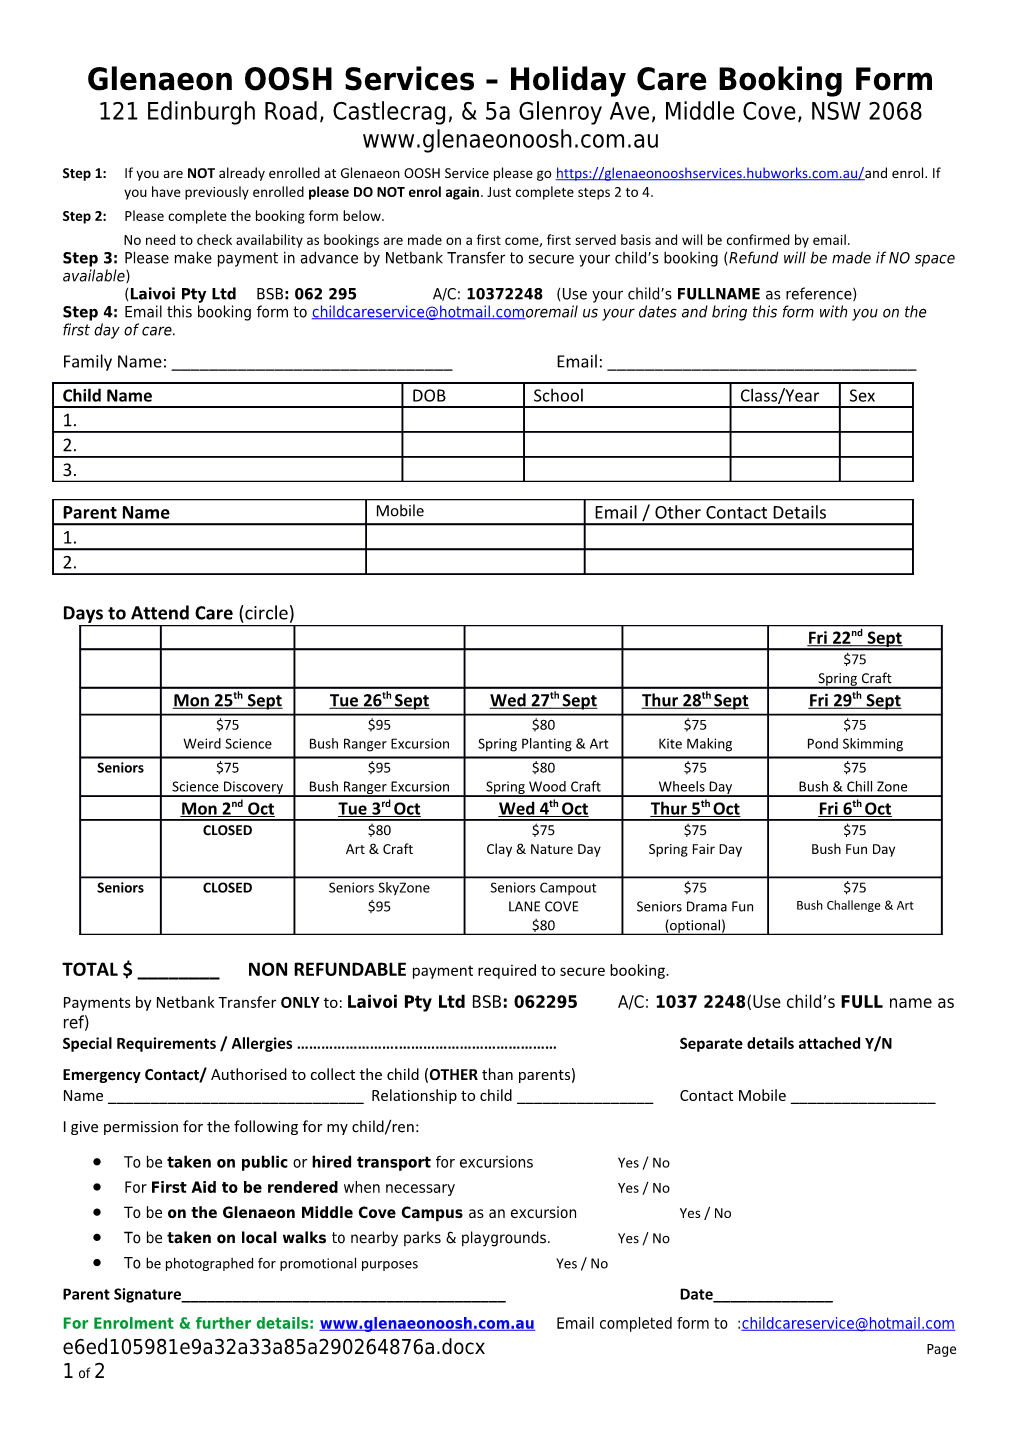 Glenaeon OOSH Services Holiday Care Booking Form